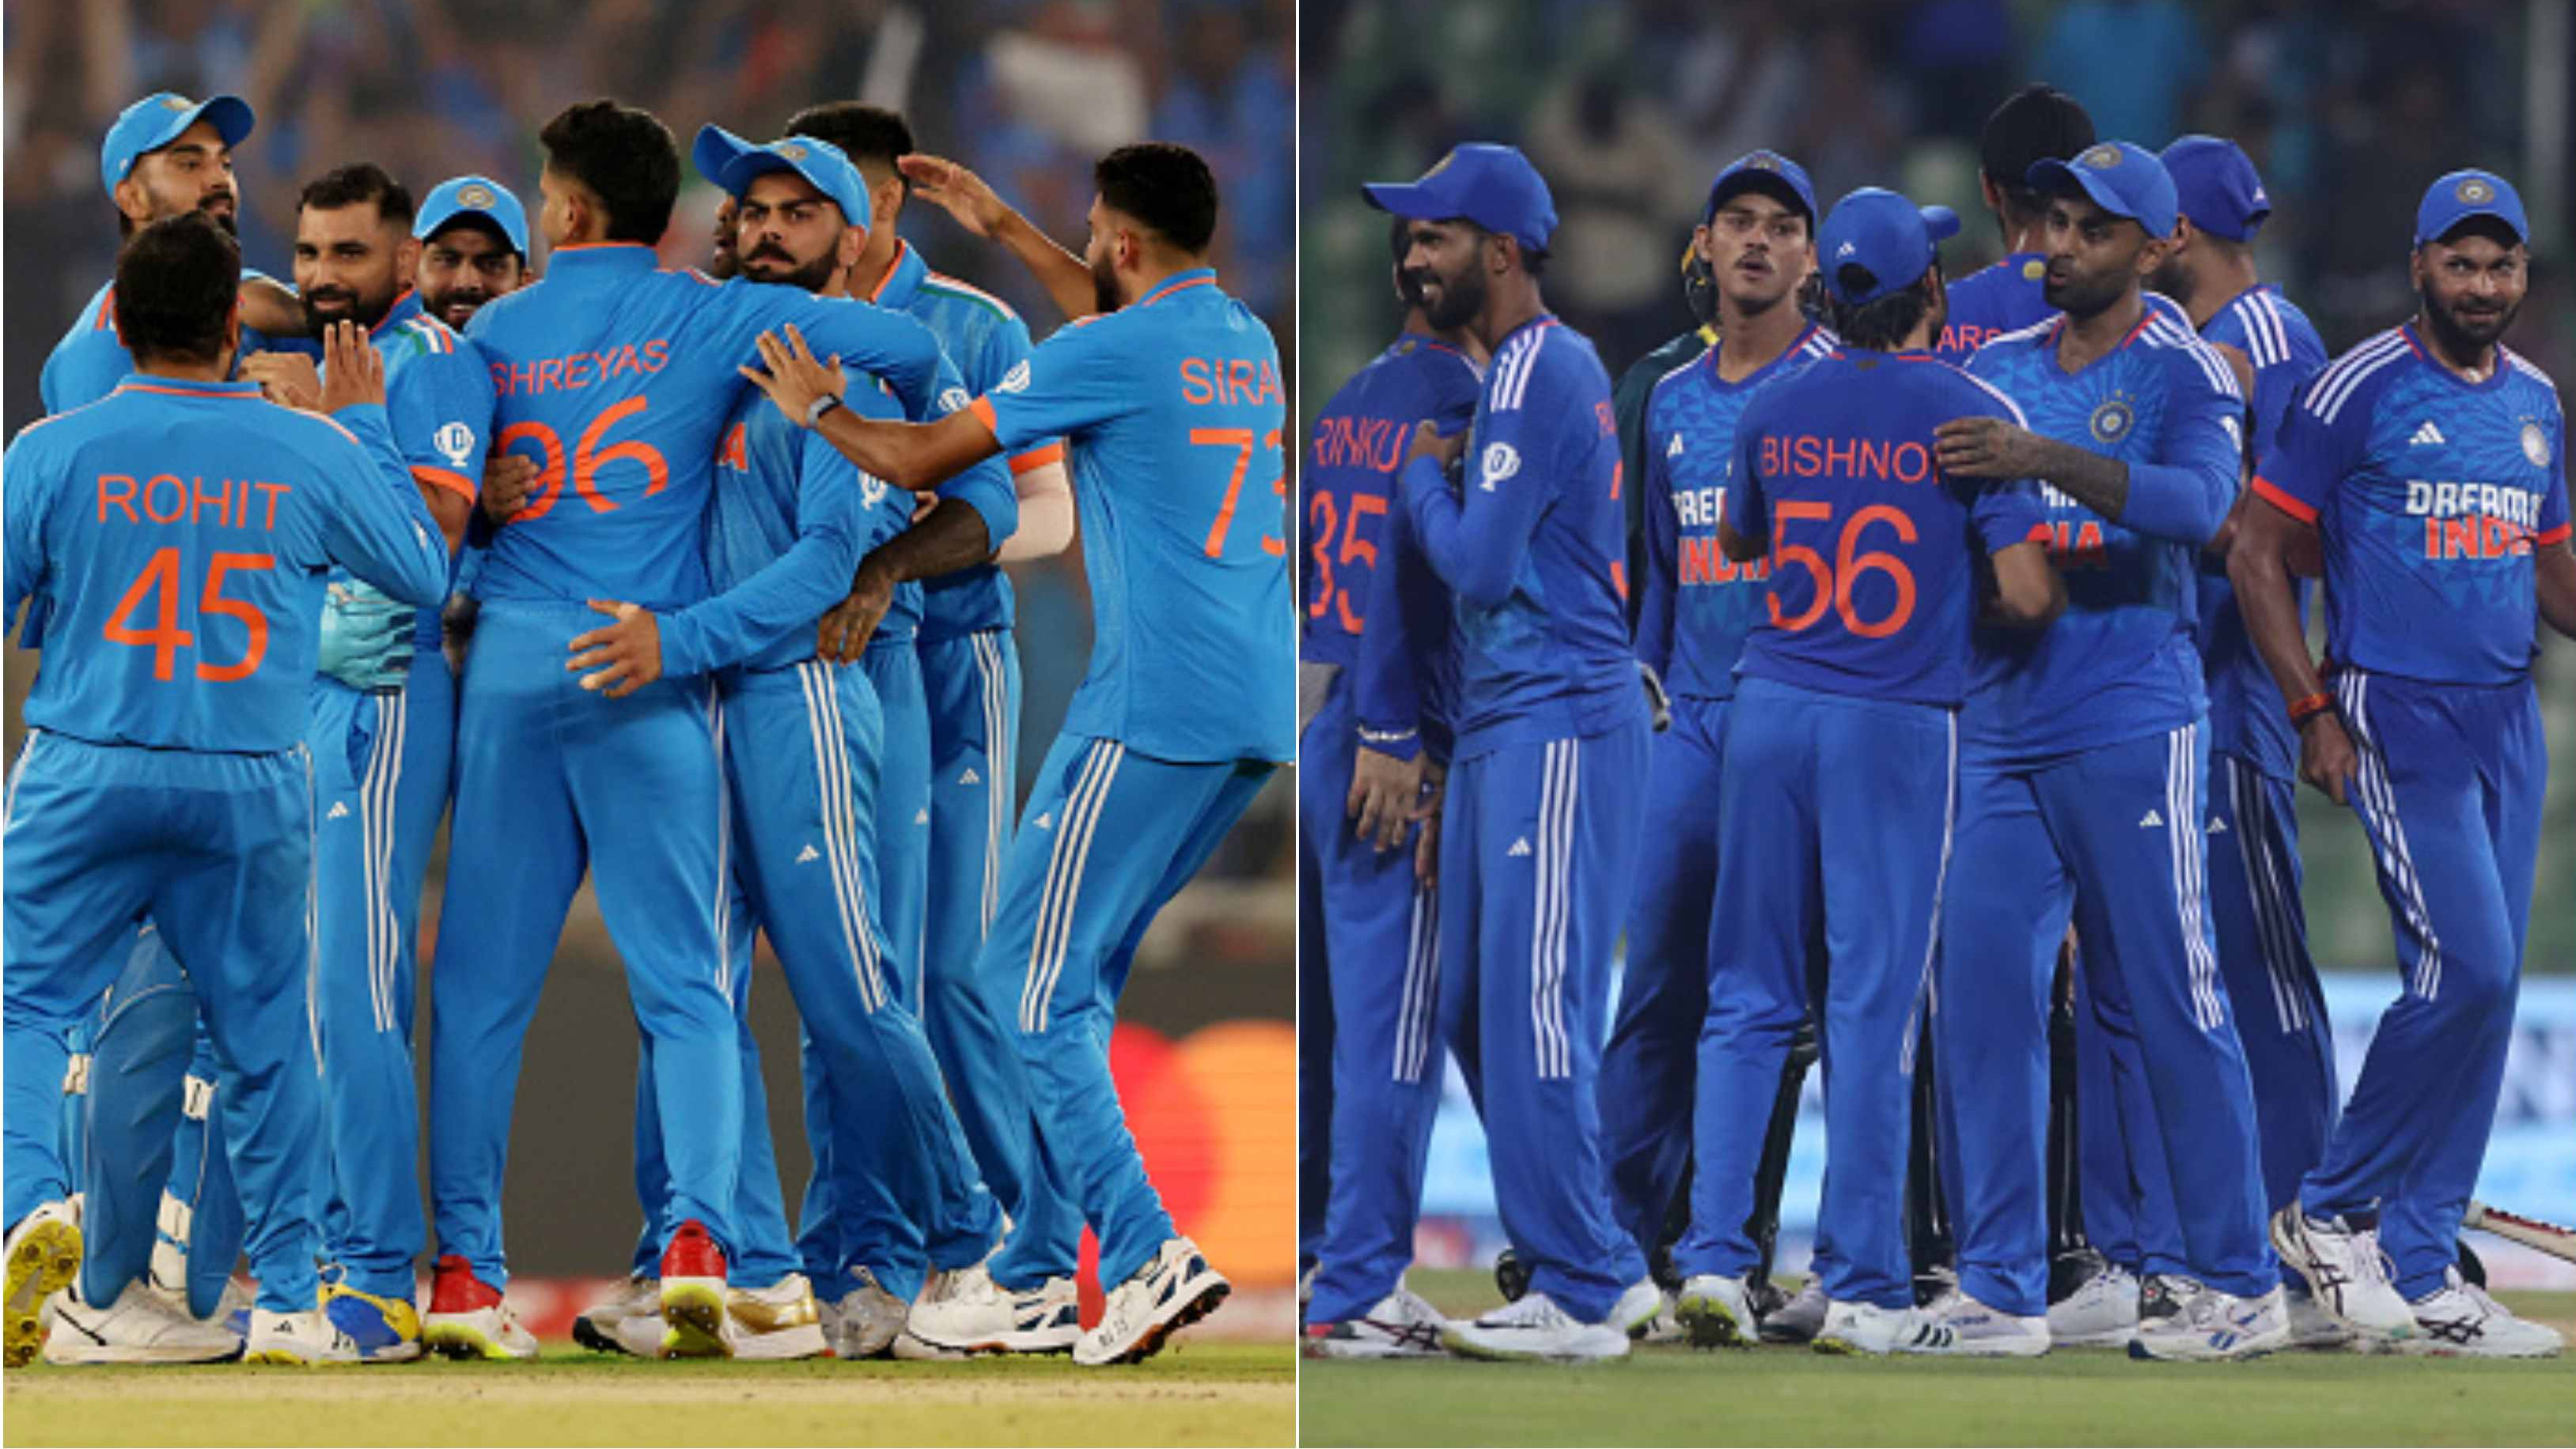 SA v IND 2023-24: BCCI announces India’s ODI and T20I squads for upcoming South Africa tour